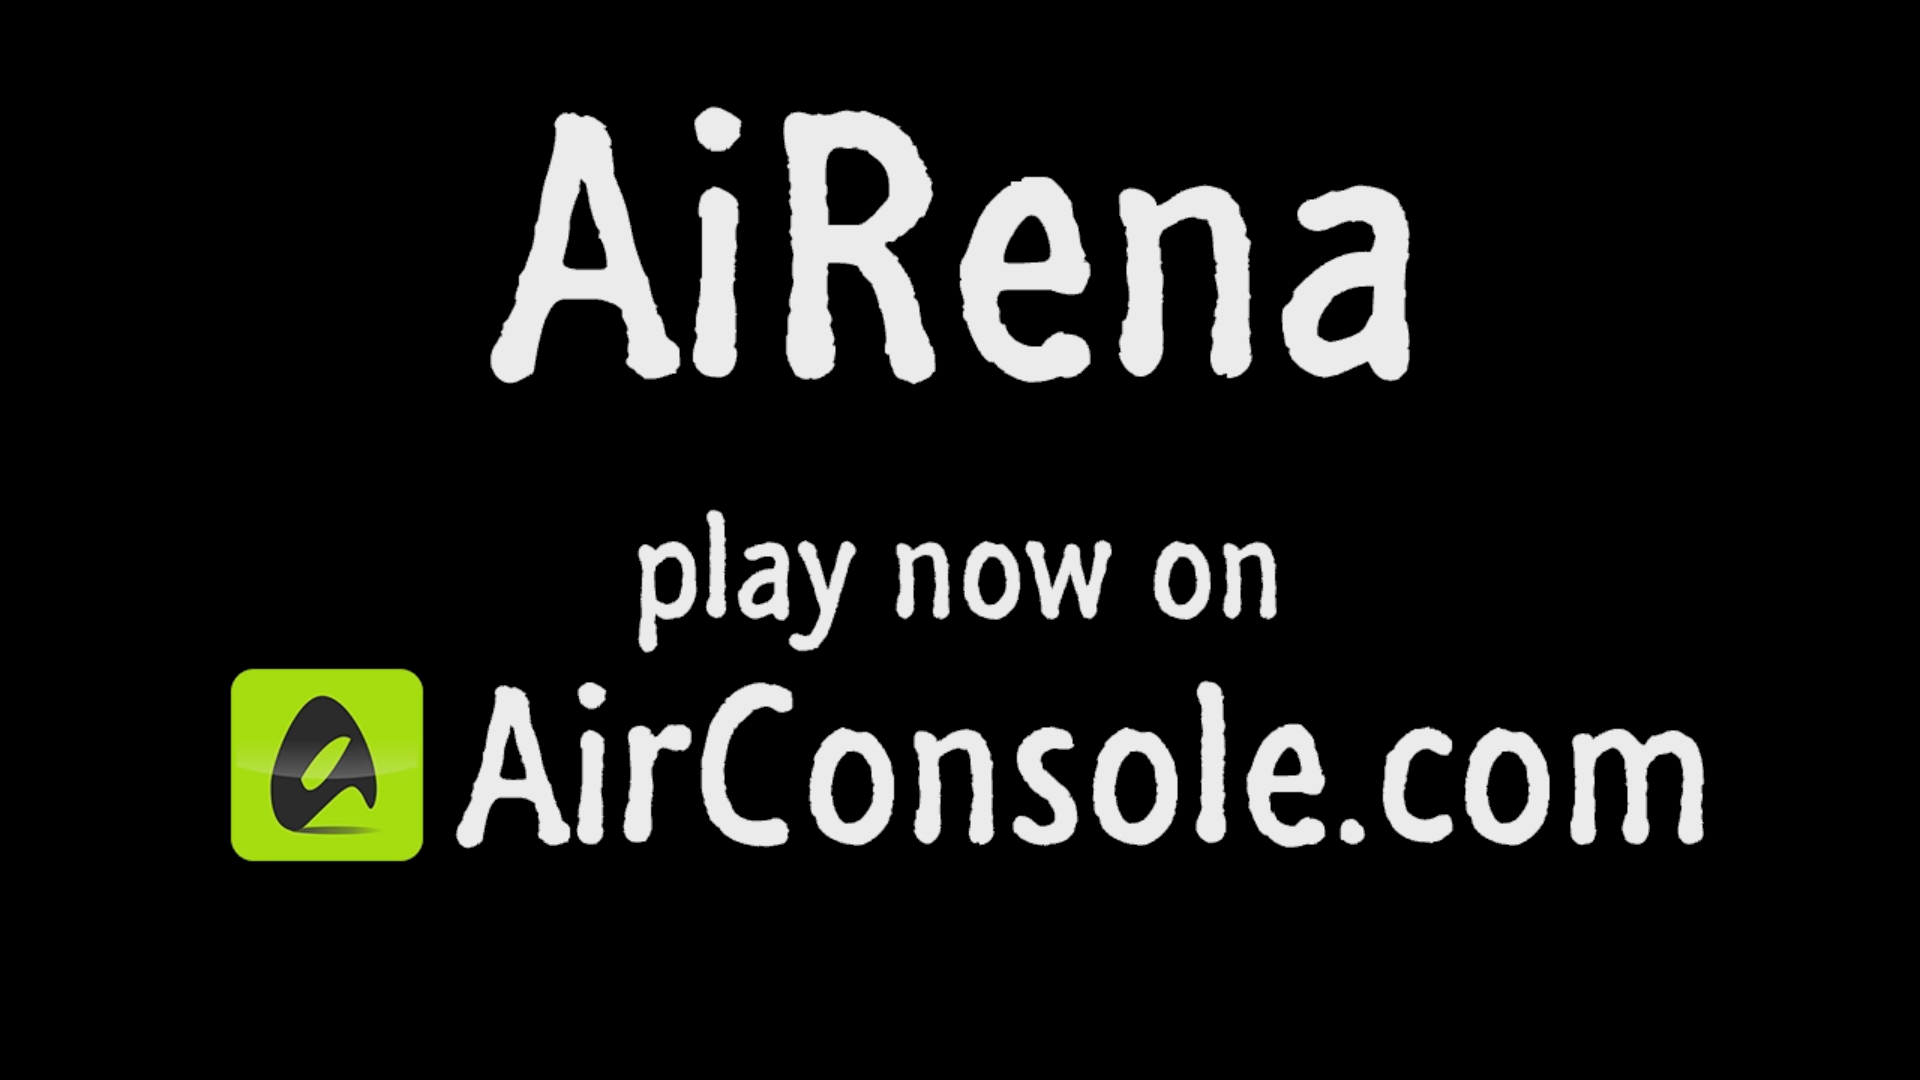 Play now on airconsole